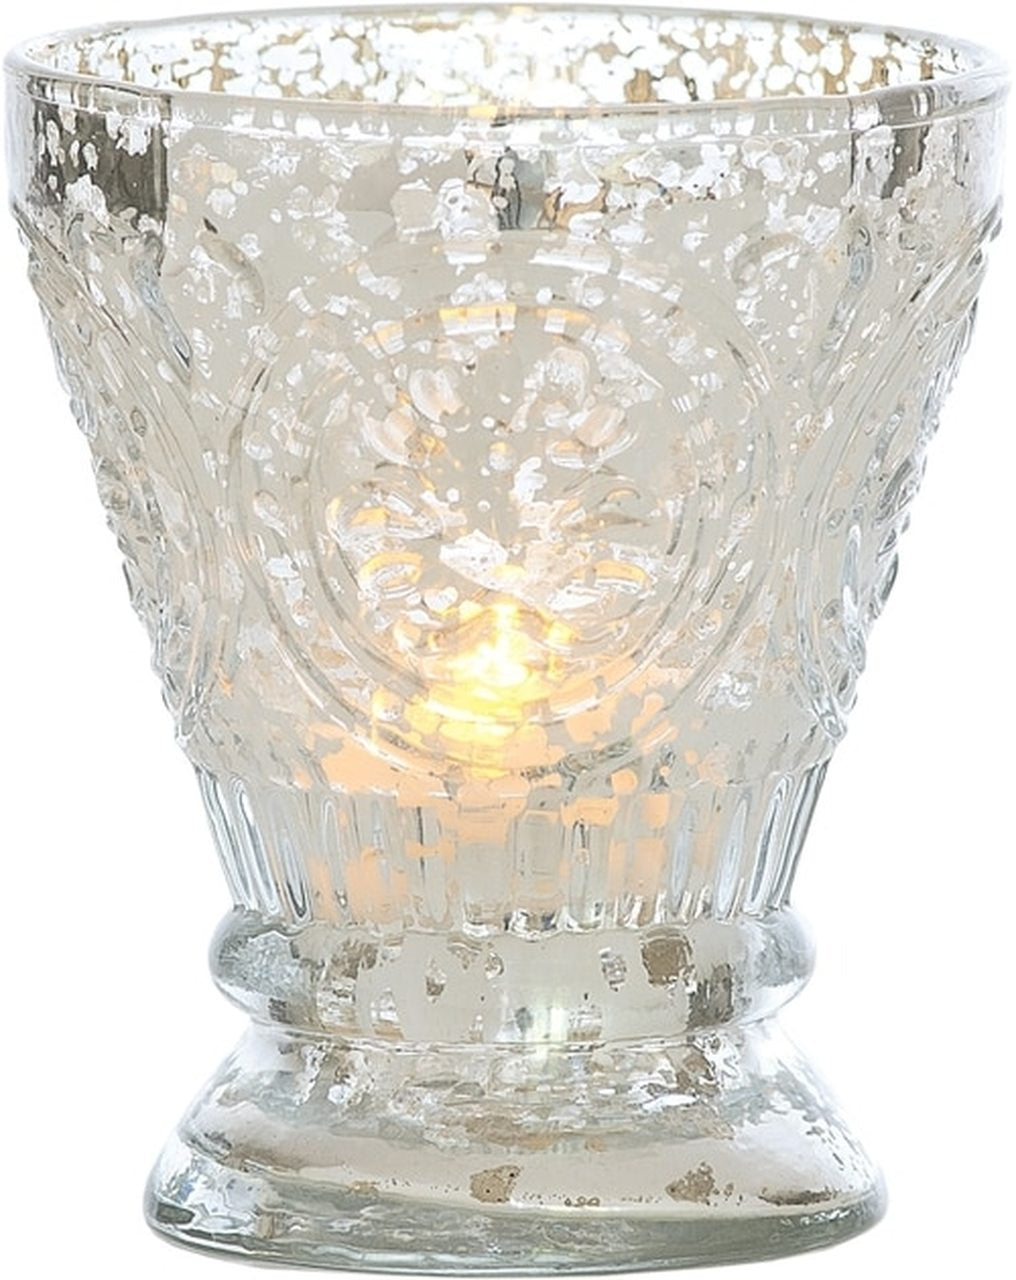 Vintage Mercury Glass Candle Holder (4-Inch, Rosemary Design, Silver) - For Use with Tea Lights - For Home Decor, Parties, and Wedding Decorations - PaperLanternStore.com - Paper Lanterns, Decor, Party Lights &amp; More